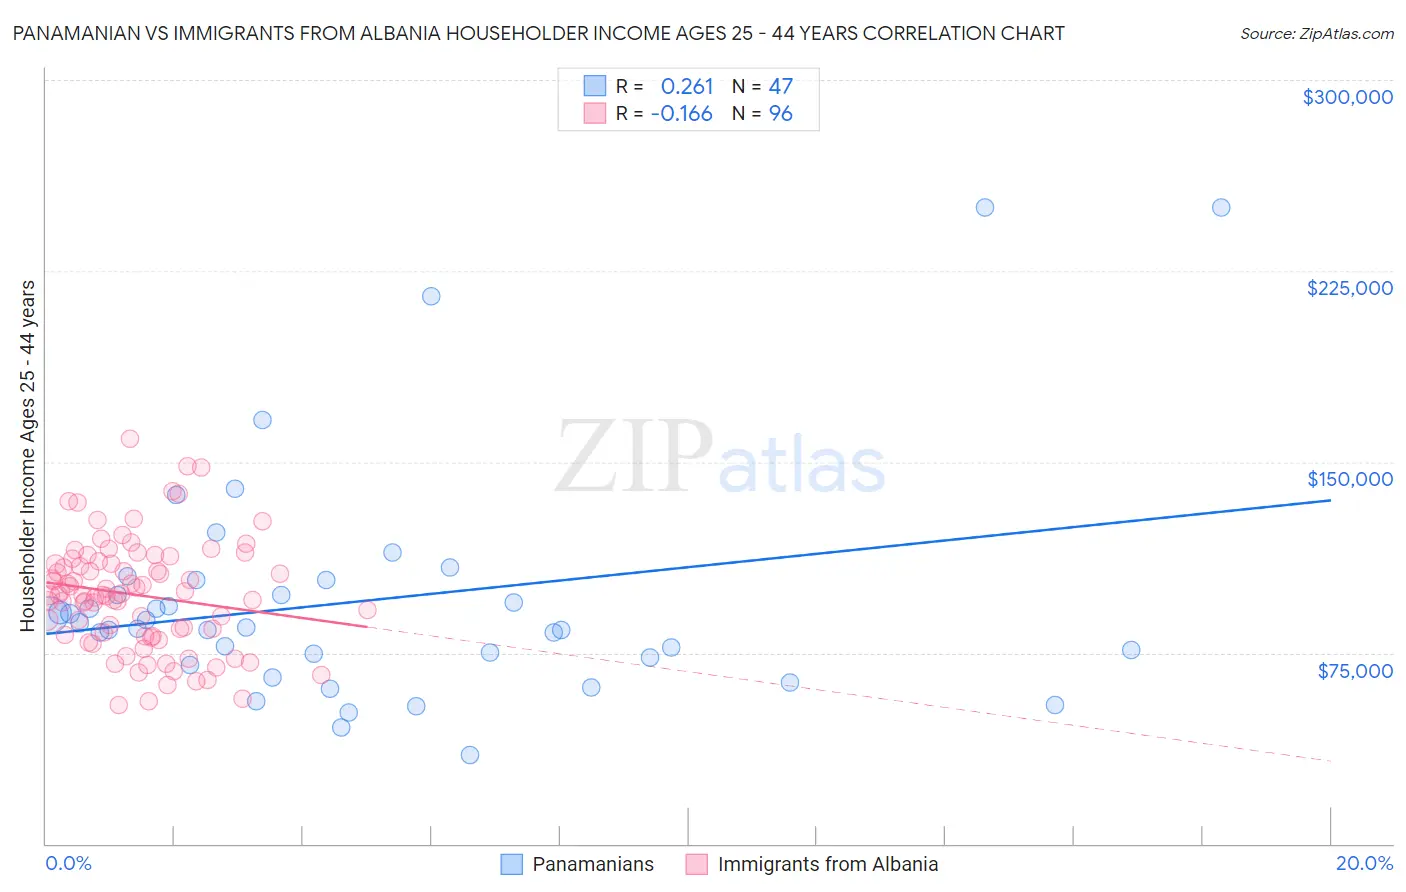 Panamanian vs Immigrants from Albania Householder Income Ages 25 - 44 years